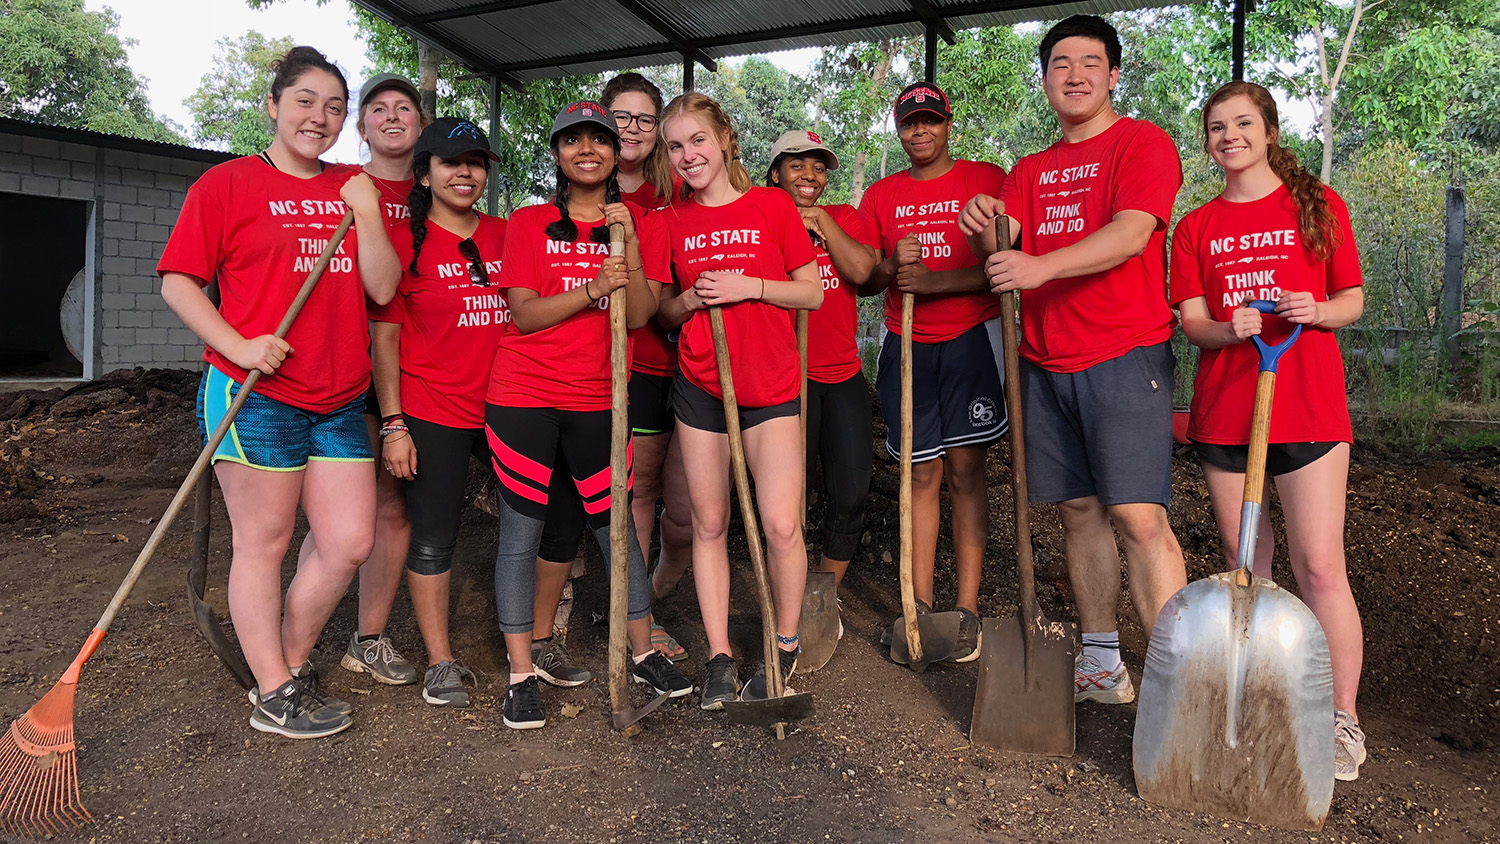 Students with garden tools and wearing red t-shirts